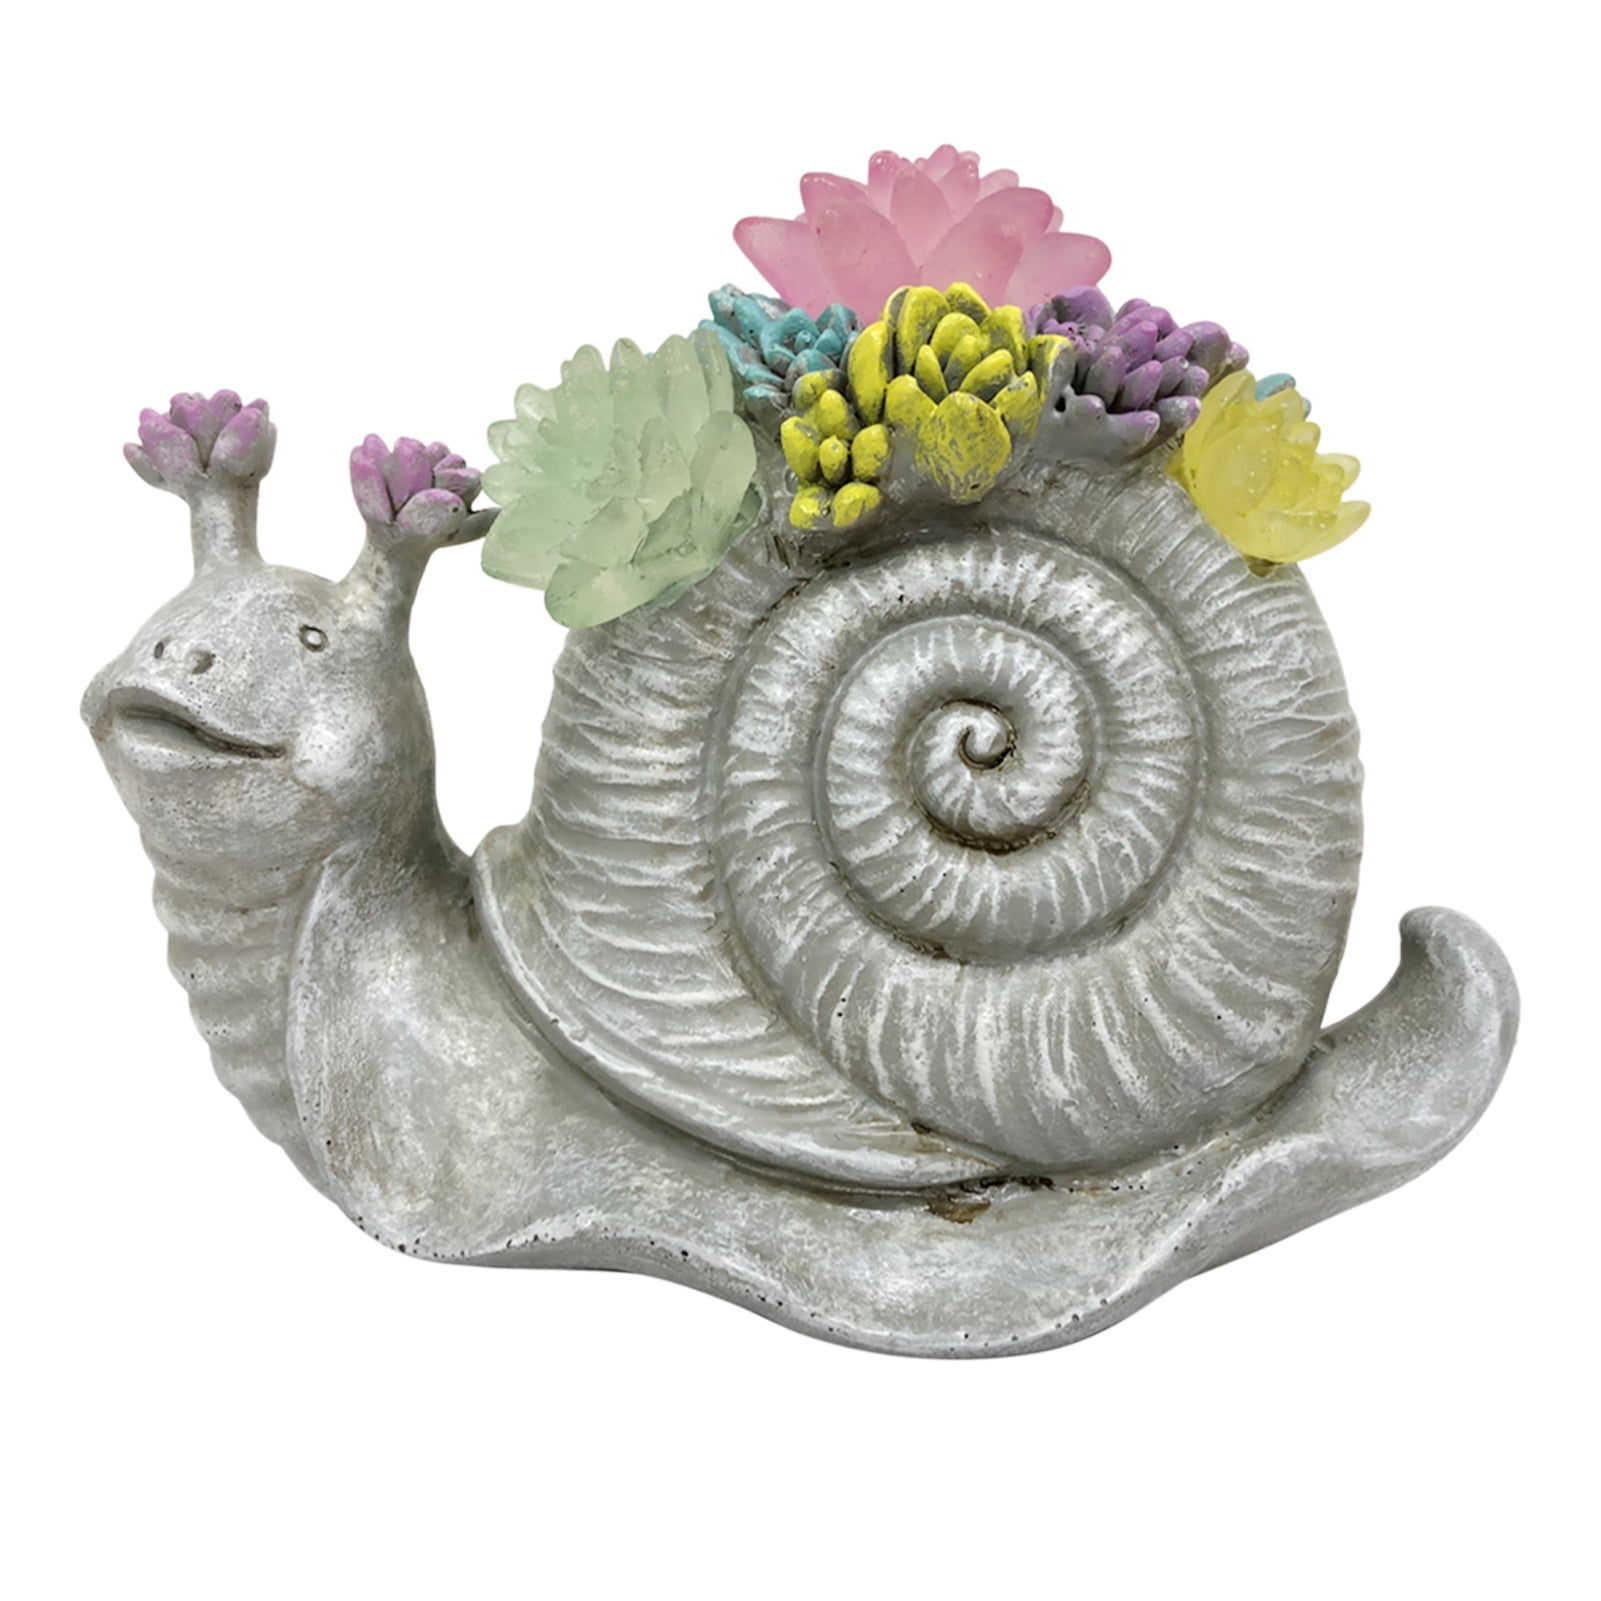 Best Gift for The Buddhist Resin Tree Trunk with Snail Figurine Home/Garden Flower Planter Pot